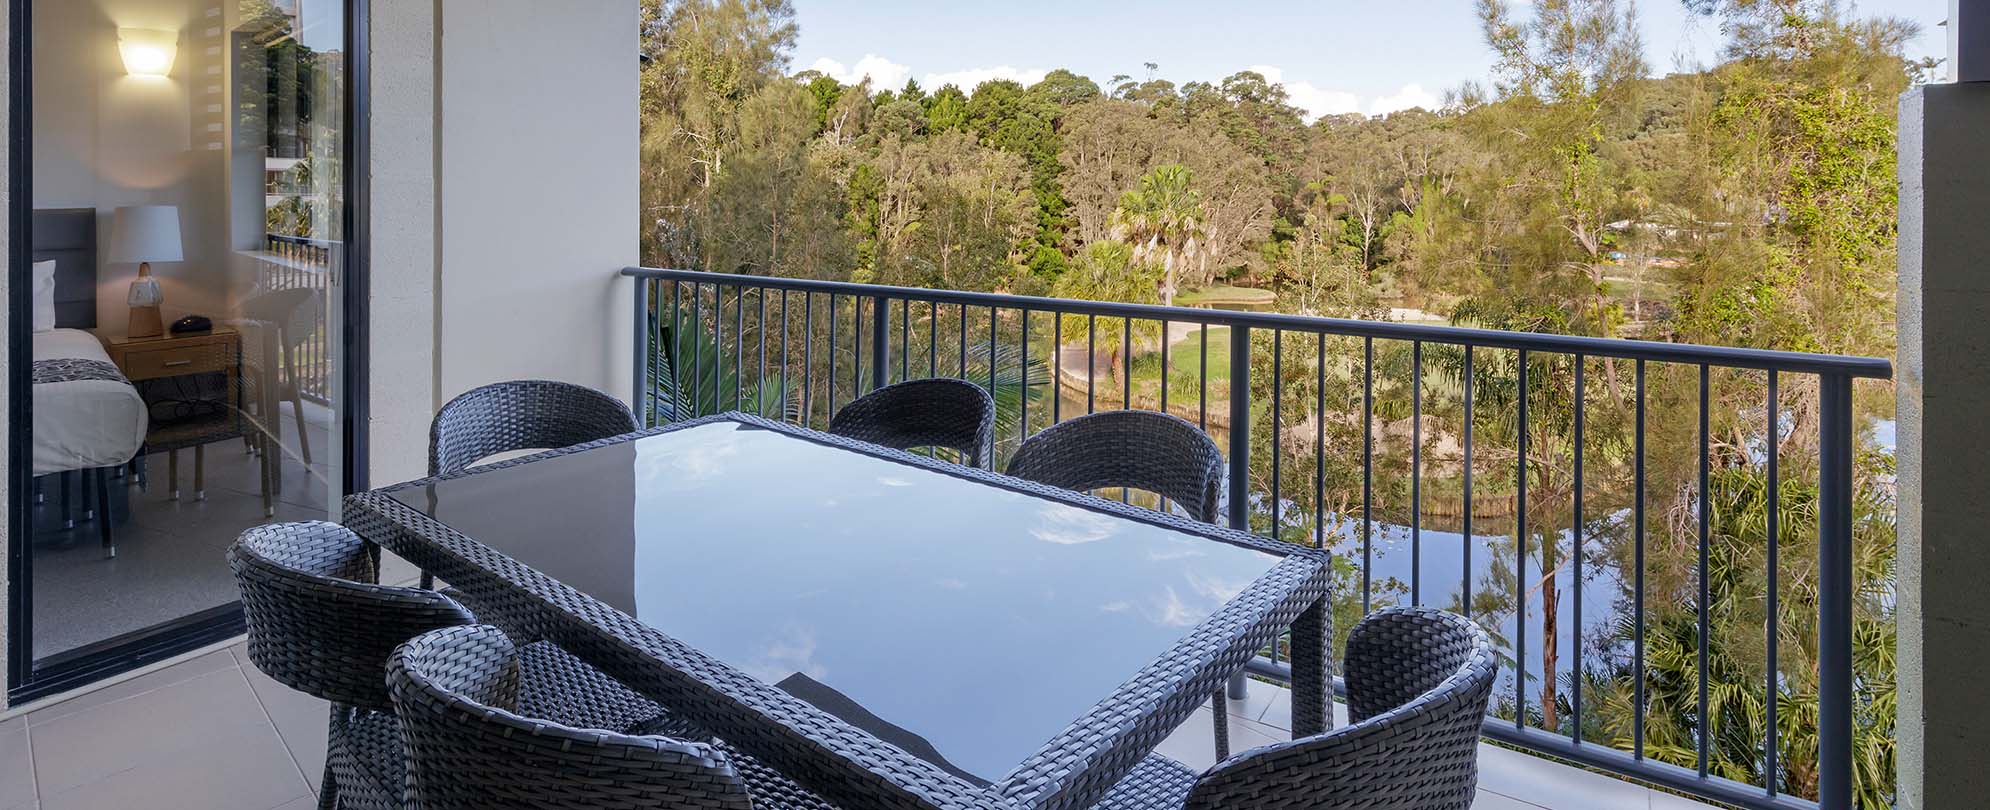 A table with six chairs on the balcony of a 2-bedroom suite at Club Wyndham Coffs Harbor.